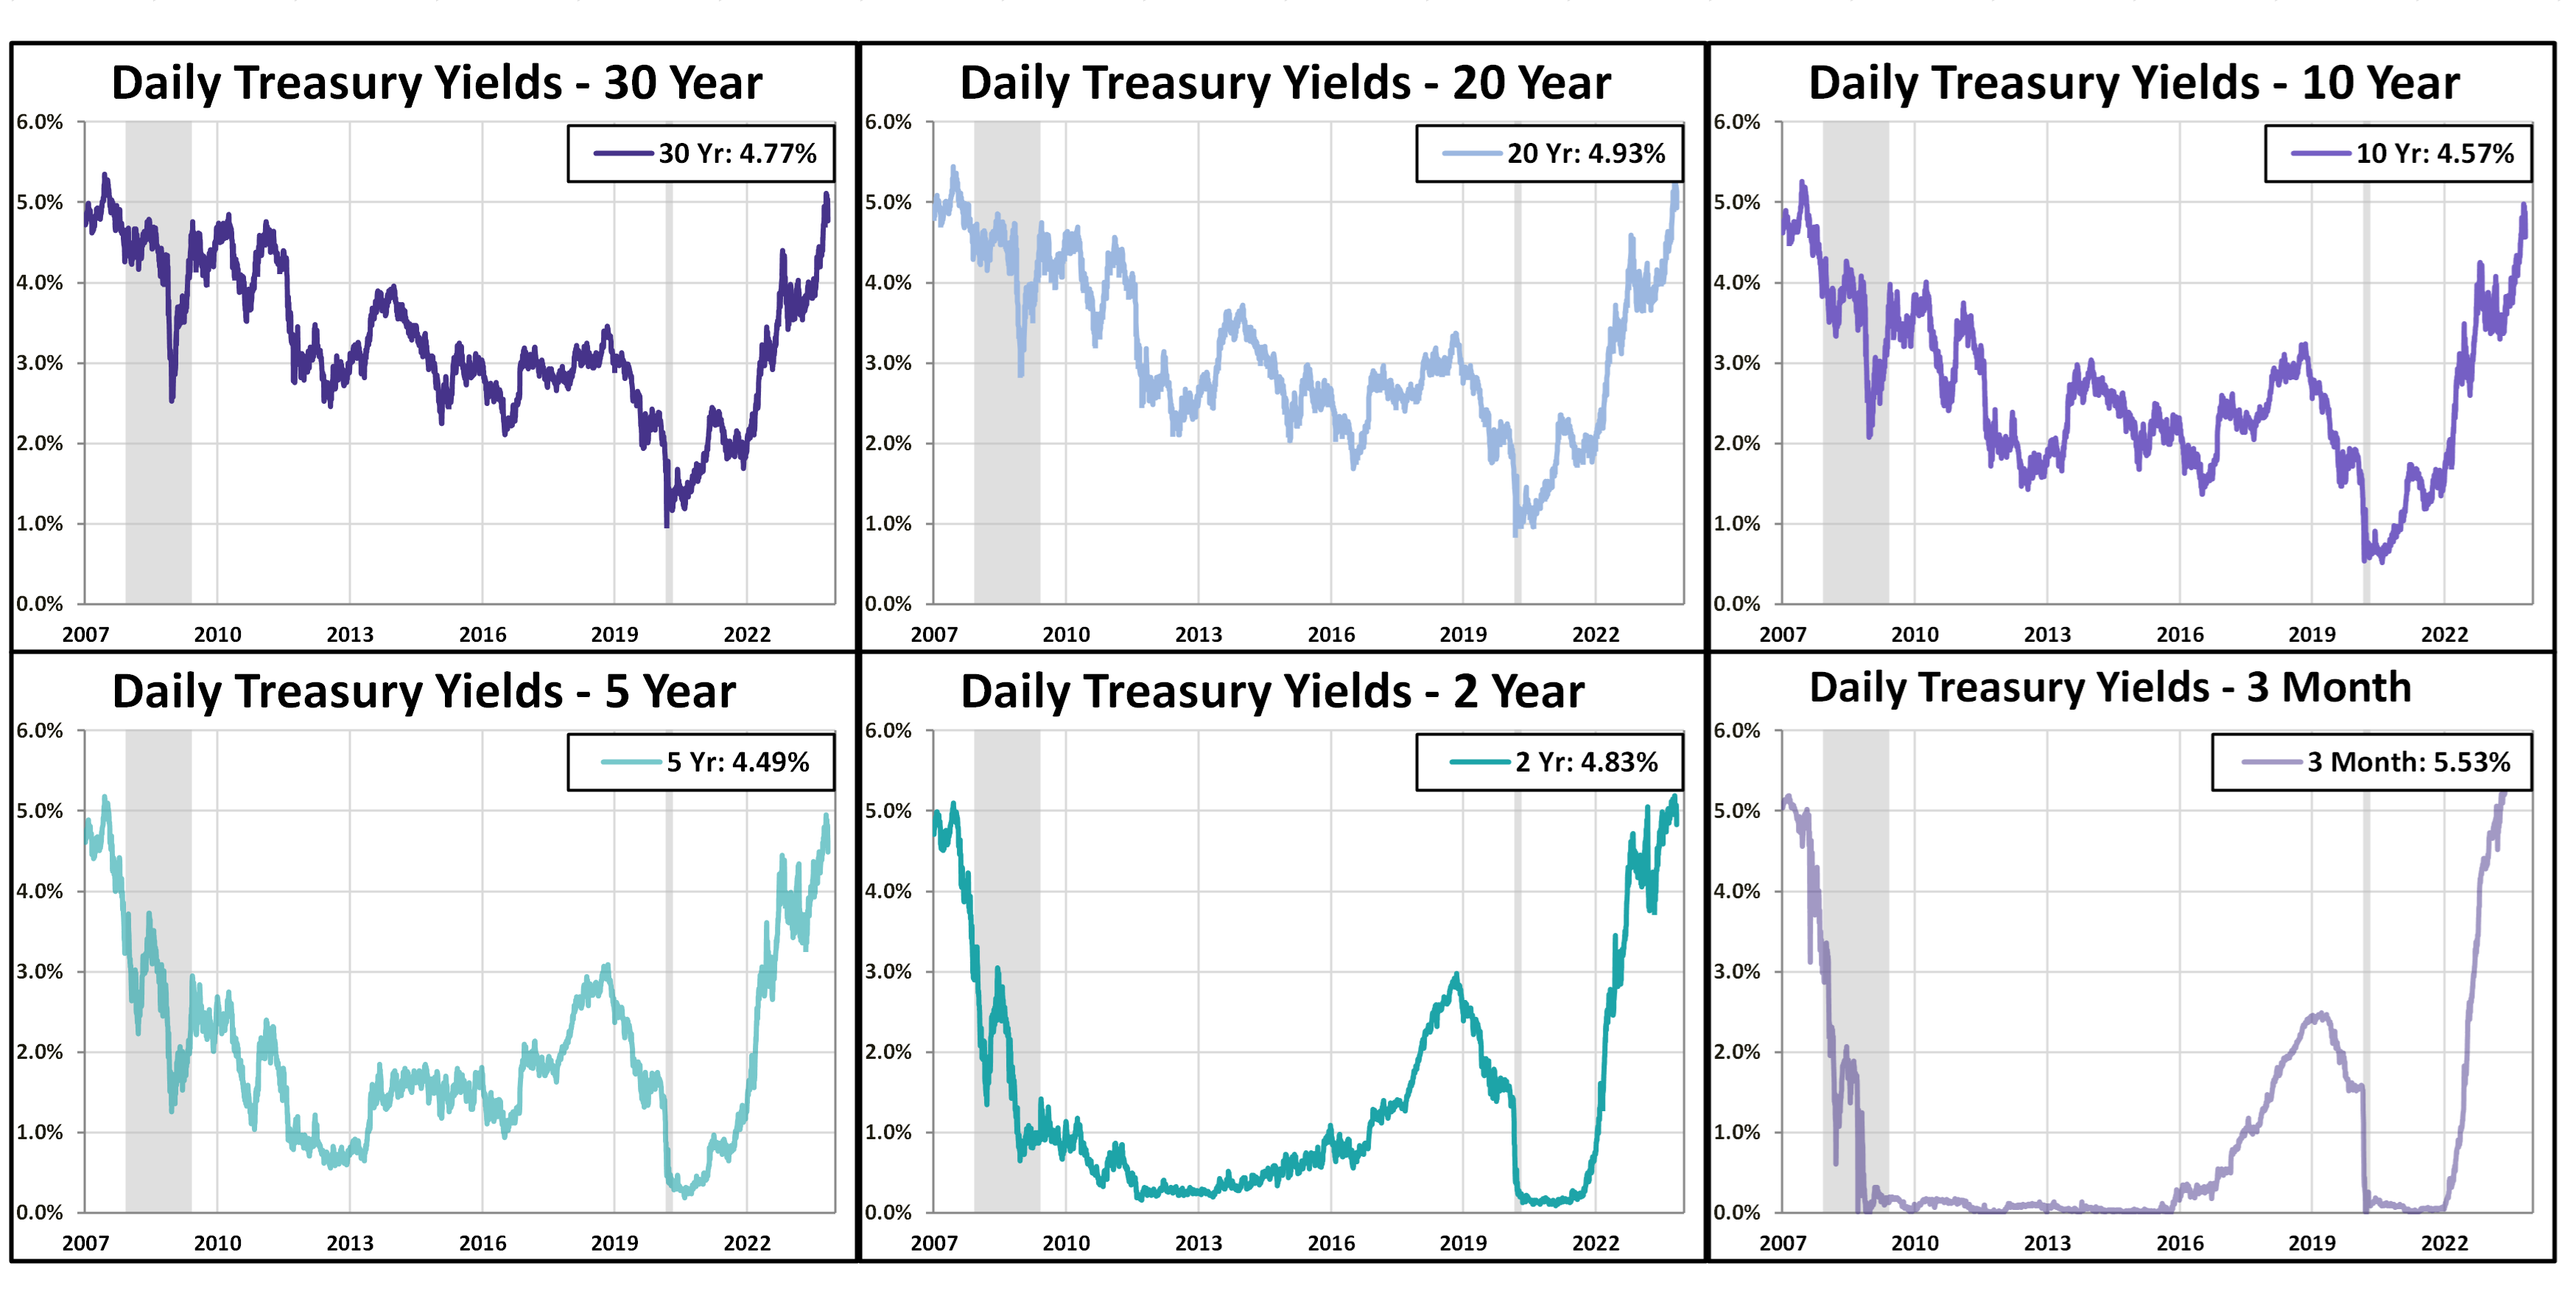 Yields in 6 charts